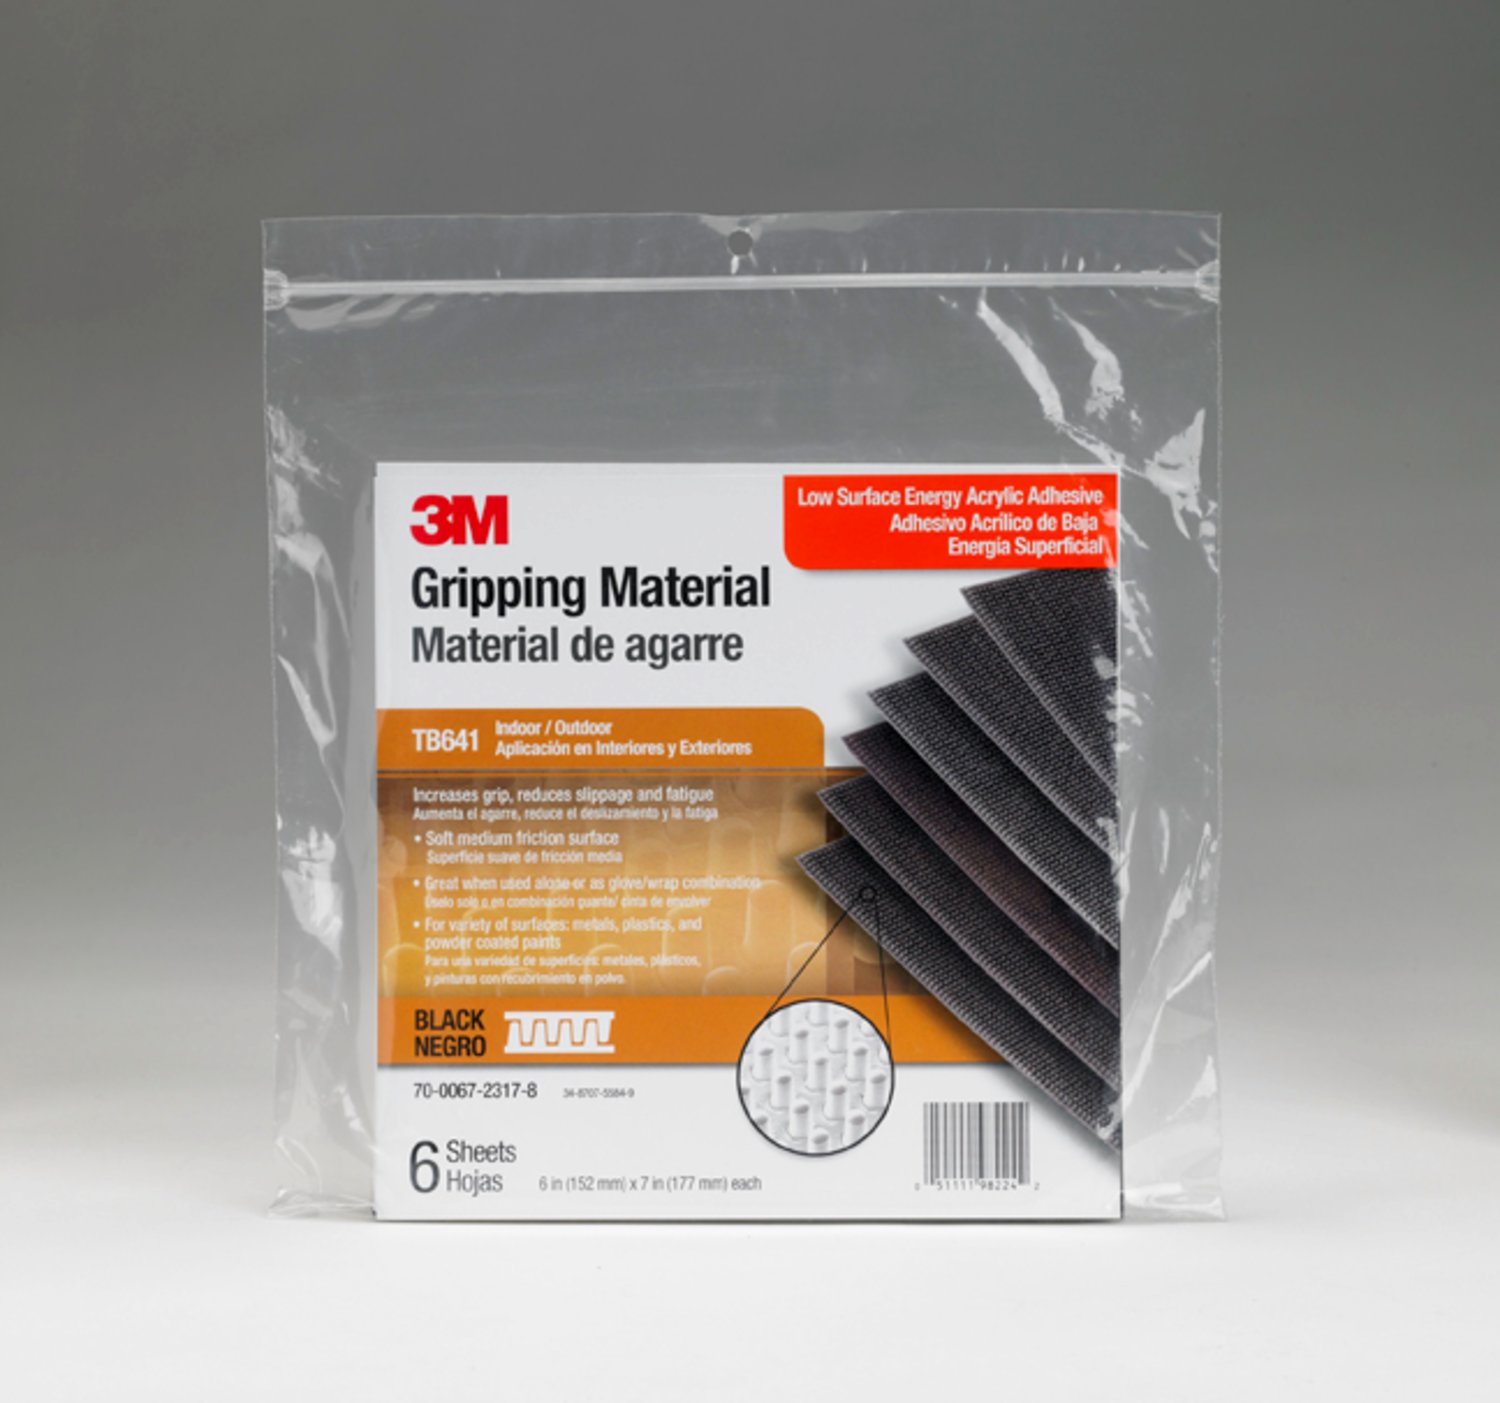 7000049649 - 3M Gripping Material TB641, Black, 6 in x 7 in, 6 sheets per bag